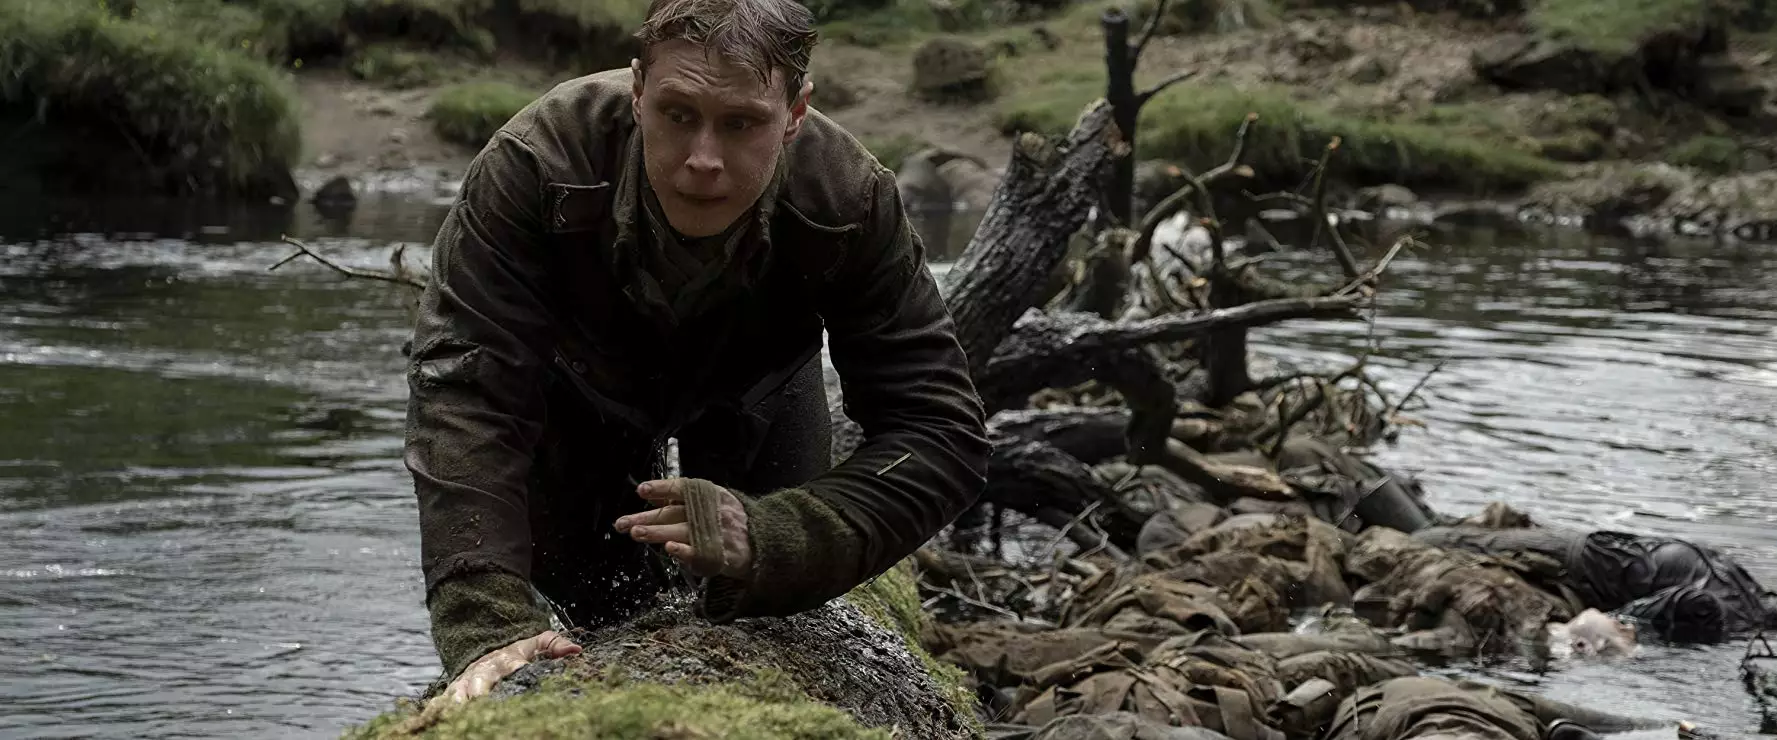 George Mackay takes one of the lead roles in the World War I biopic.